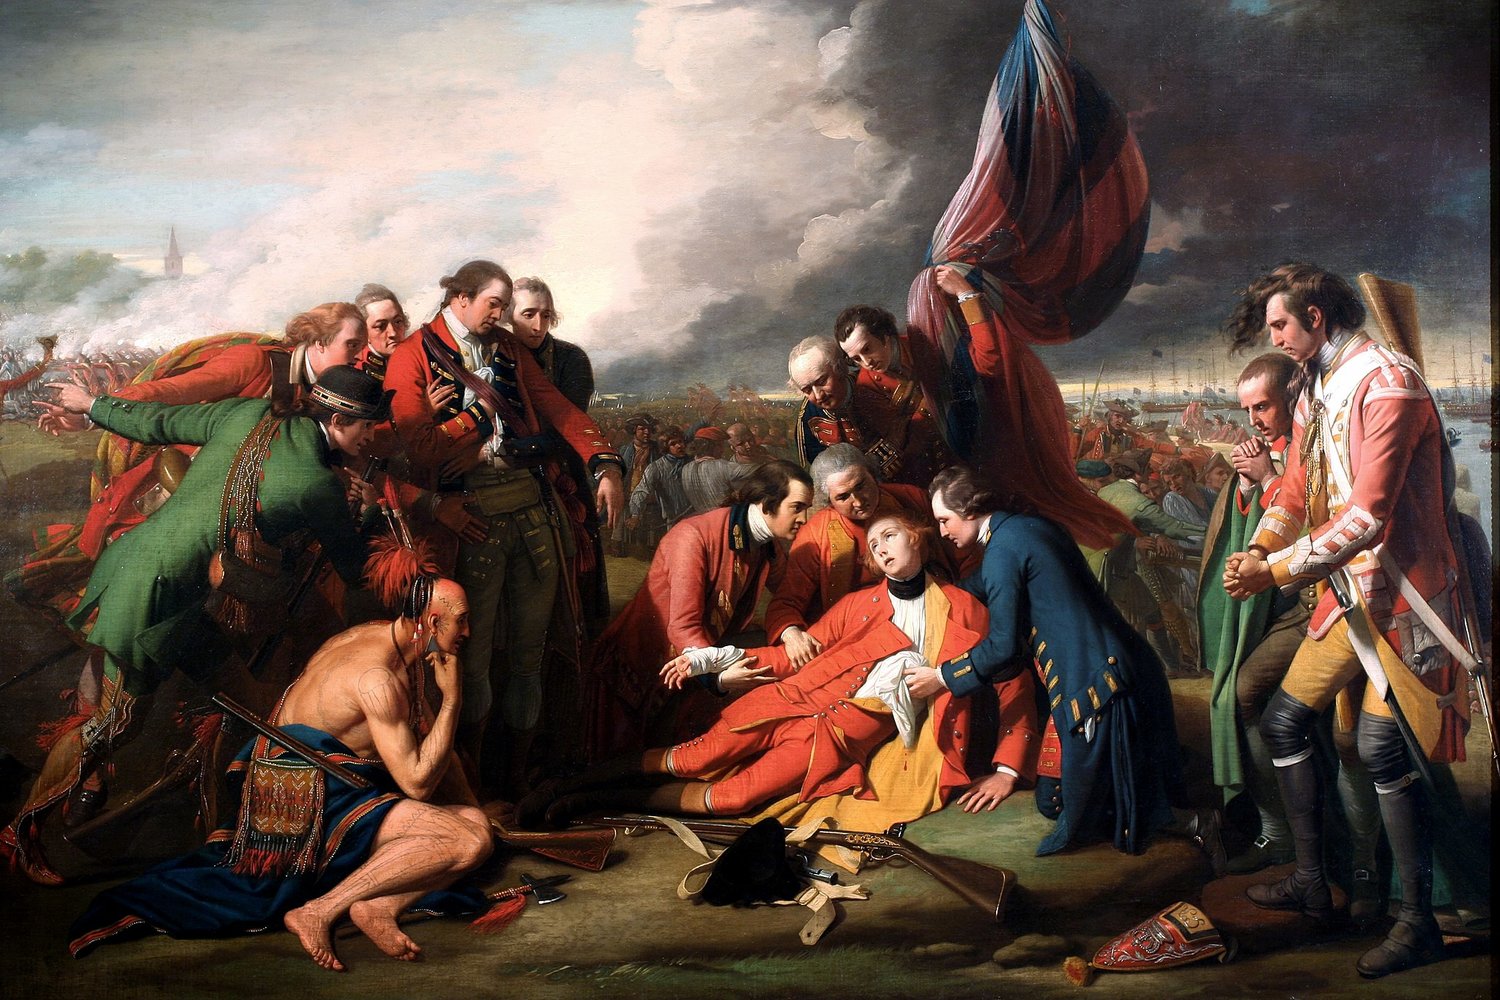 Sir William Johnson, in green, appears in Benjamin West's painting "The Death of General Wolfe." Wikipedia notes that Johnson was not actually present at the event.